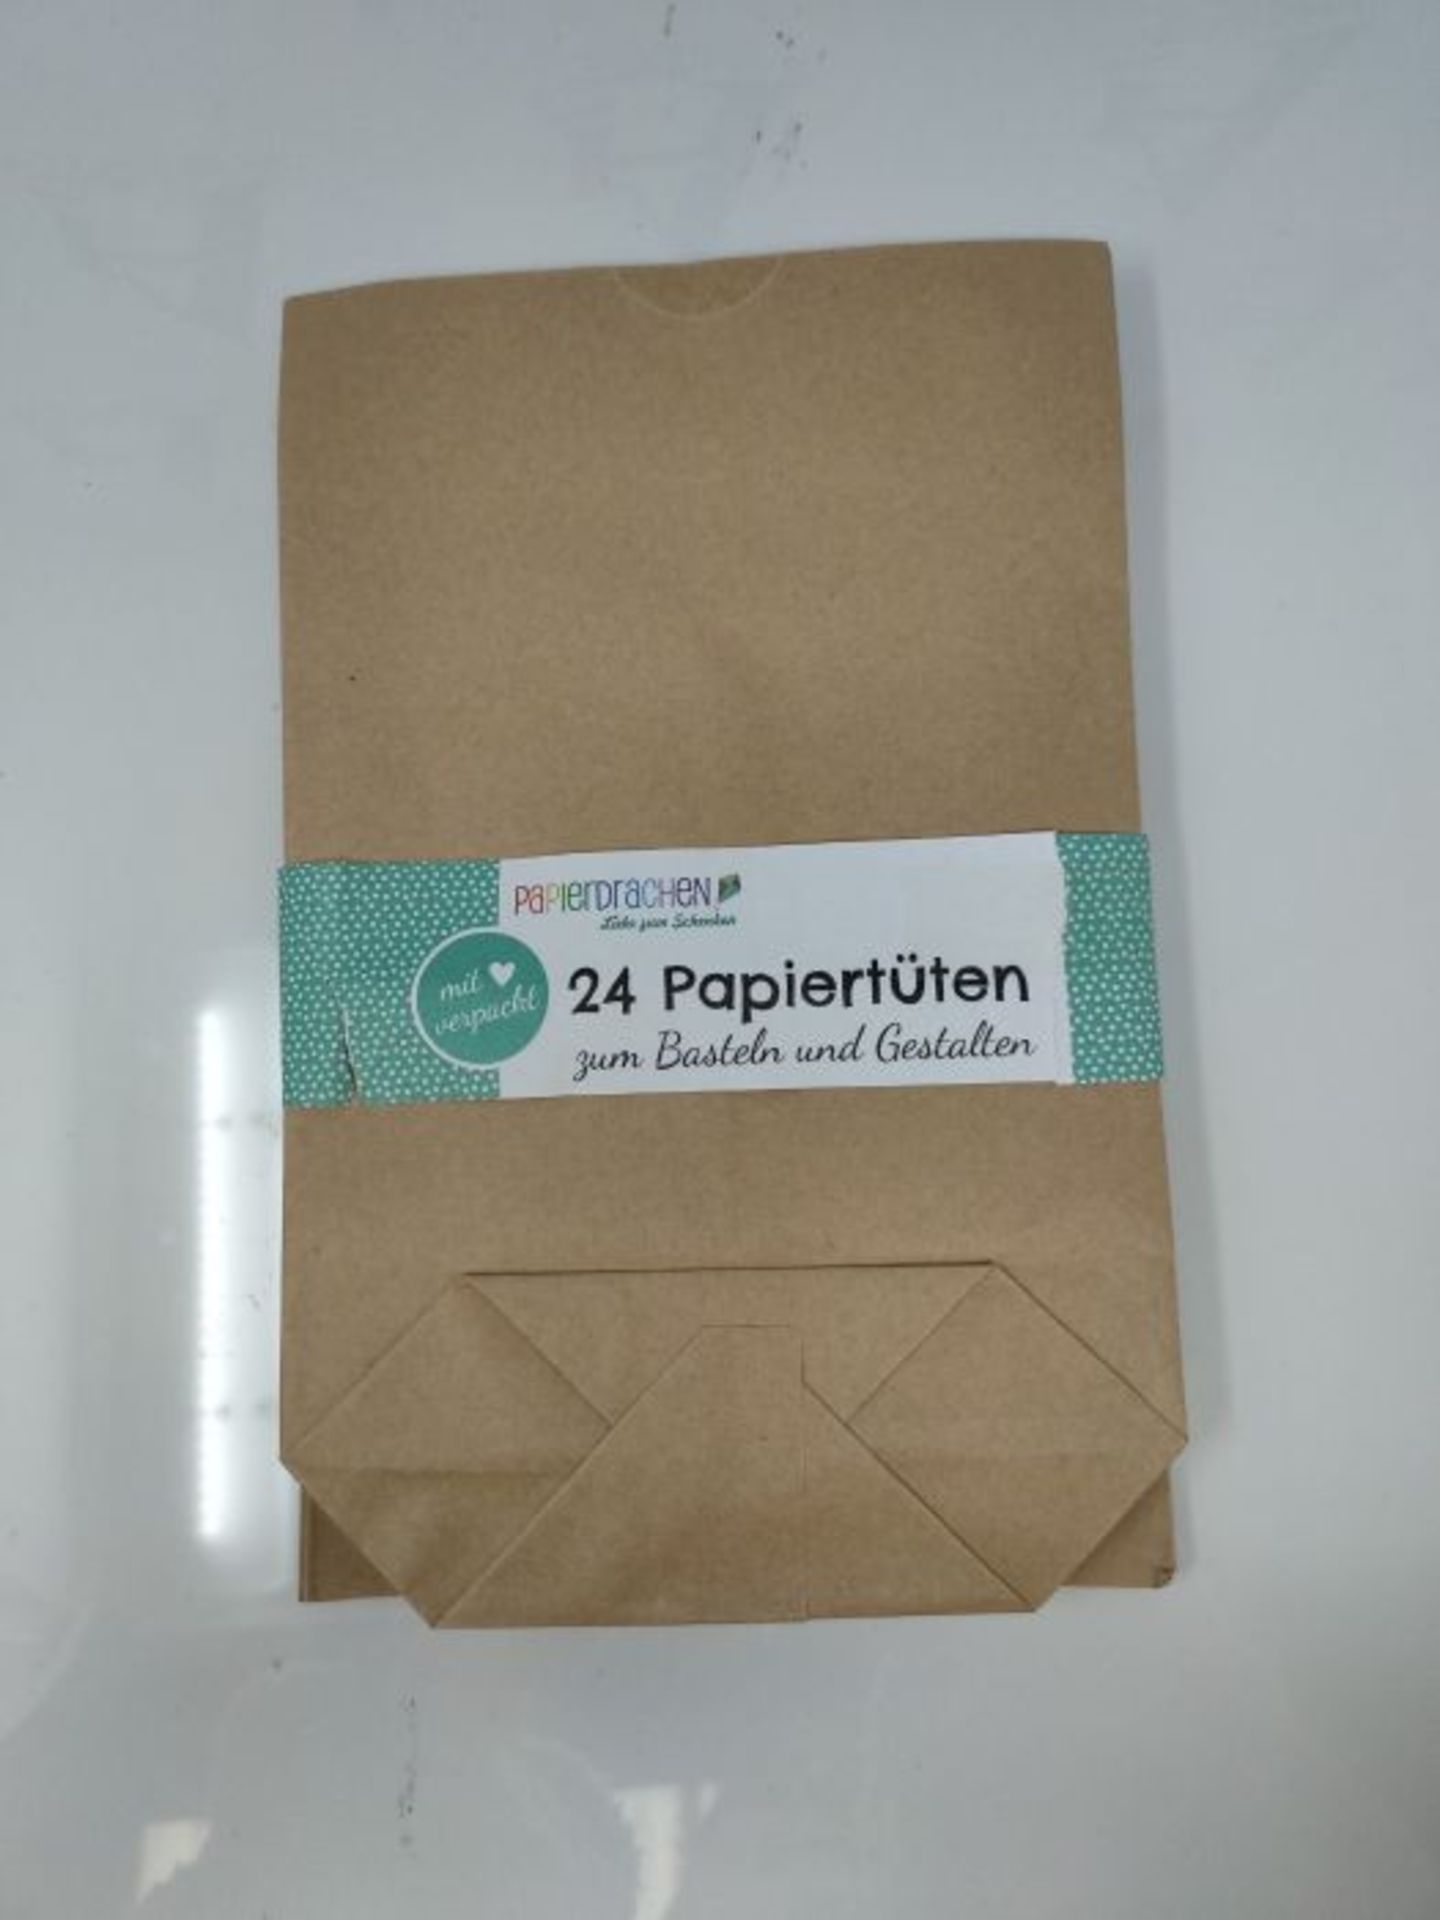 Papierdrachen Advent calendar 24 paper bags with stickers - black and white geometric - Image 3 of 3